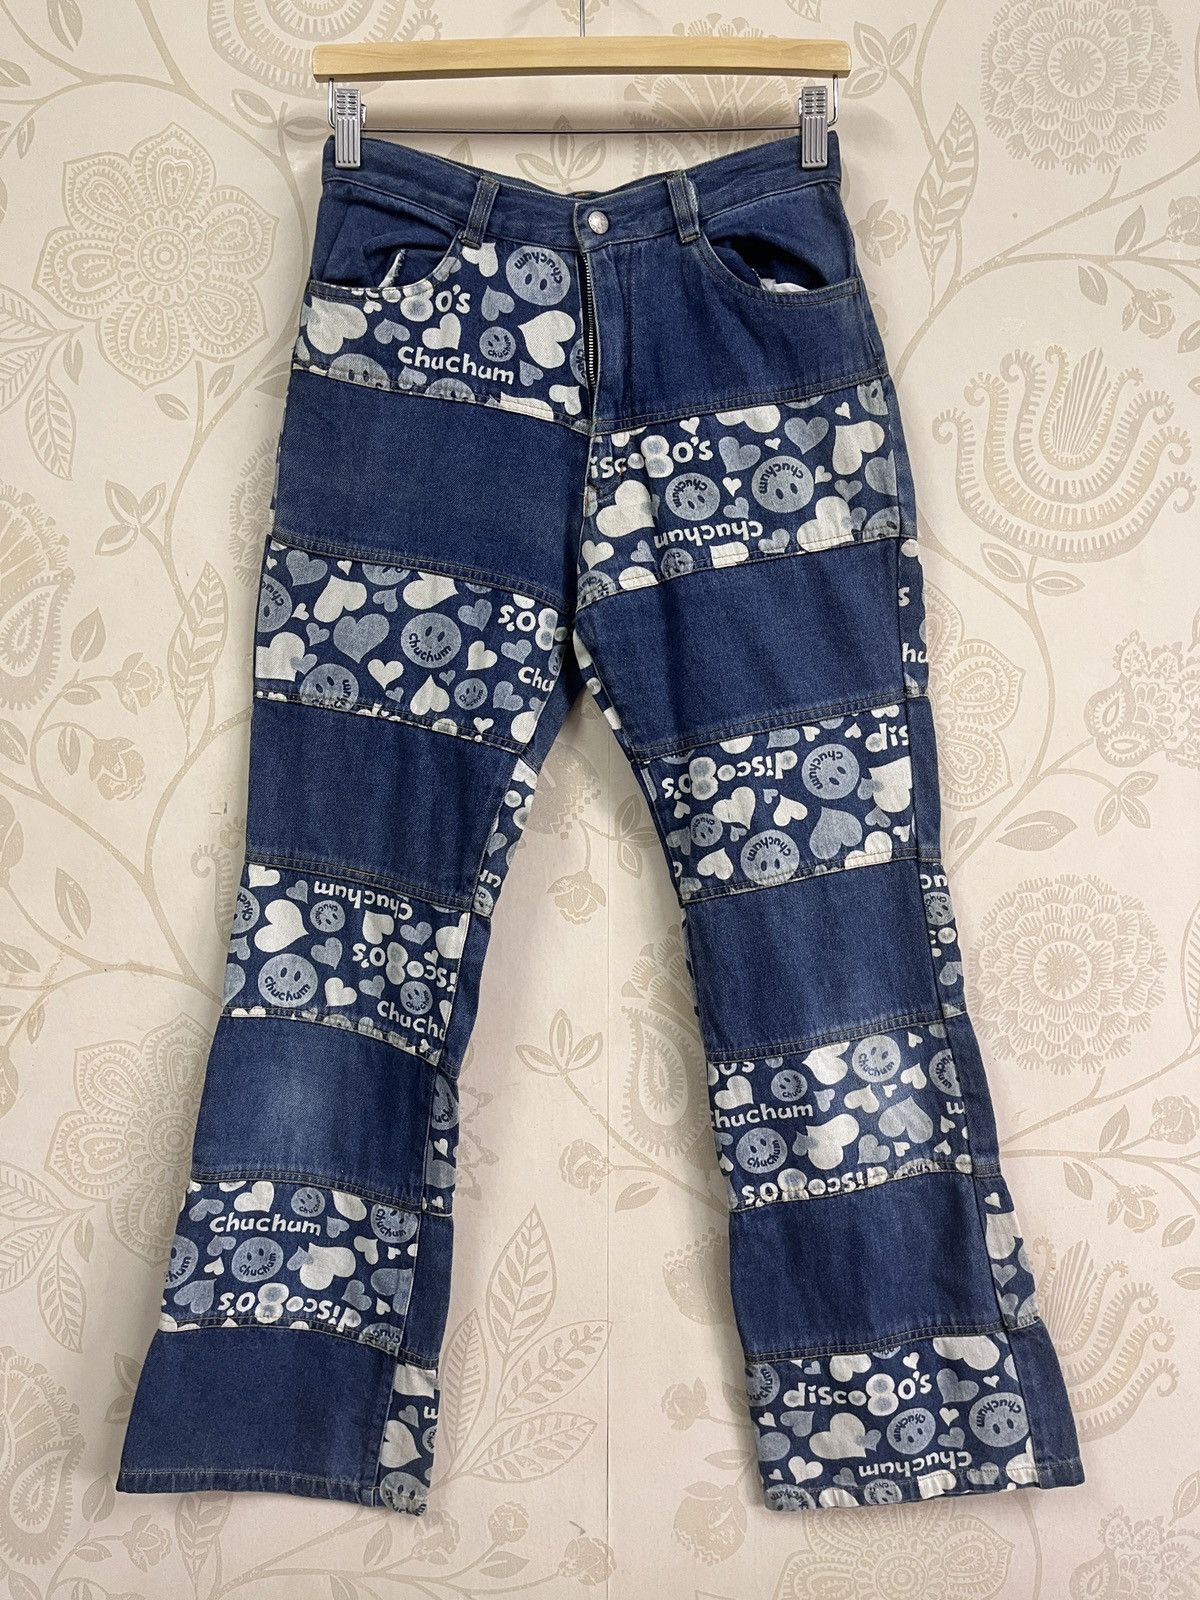 Vintage - Hysteric Flared Chuchum Full Printed Patches Denim Jeans - 20